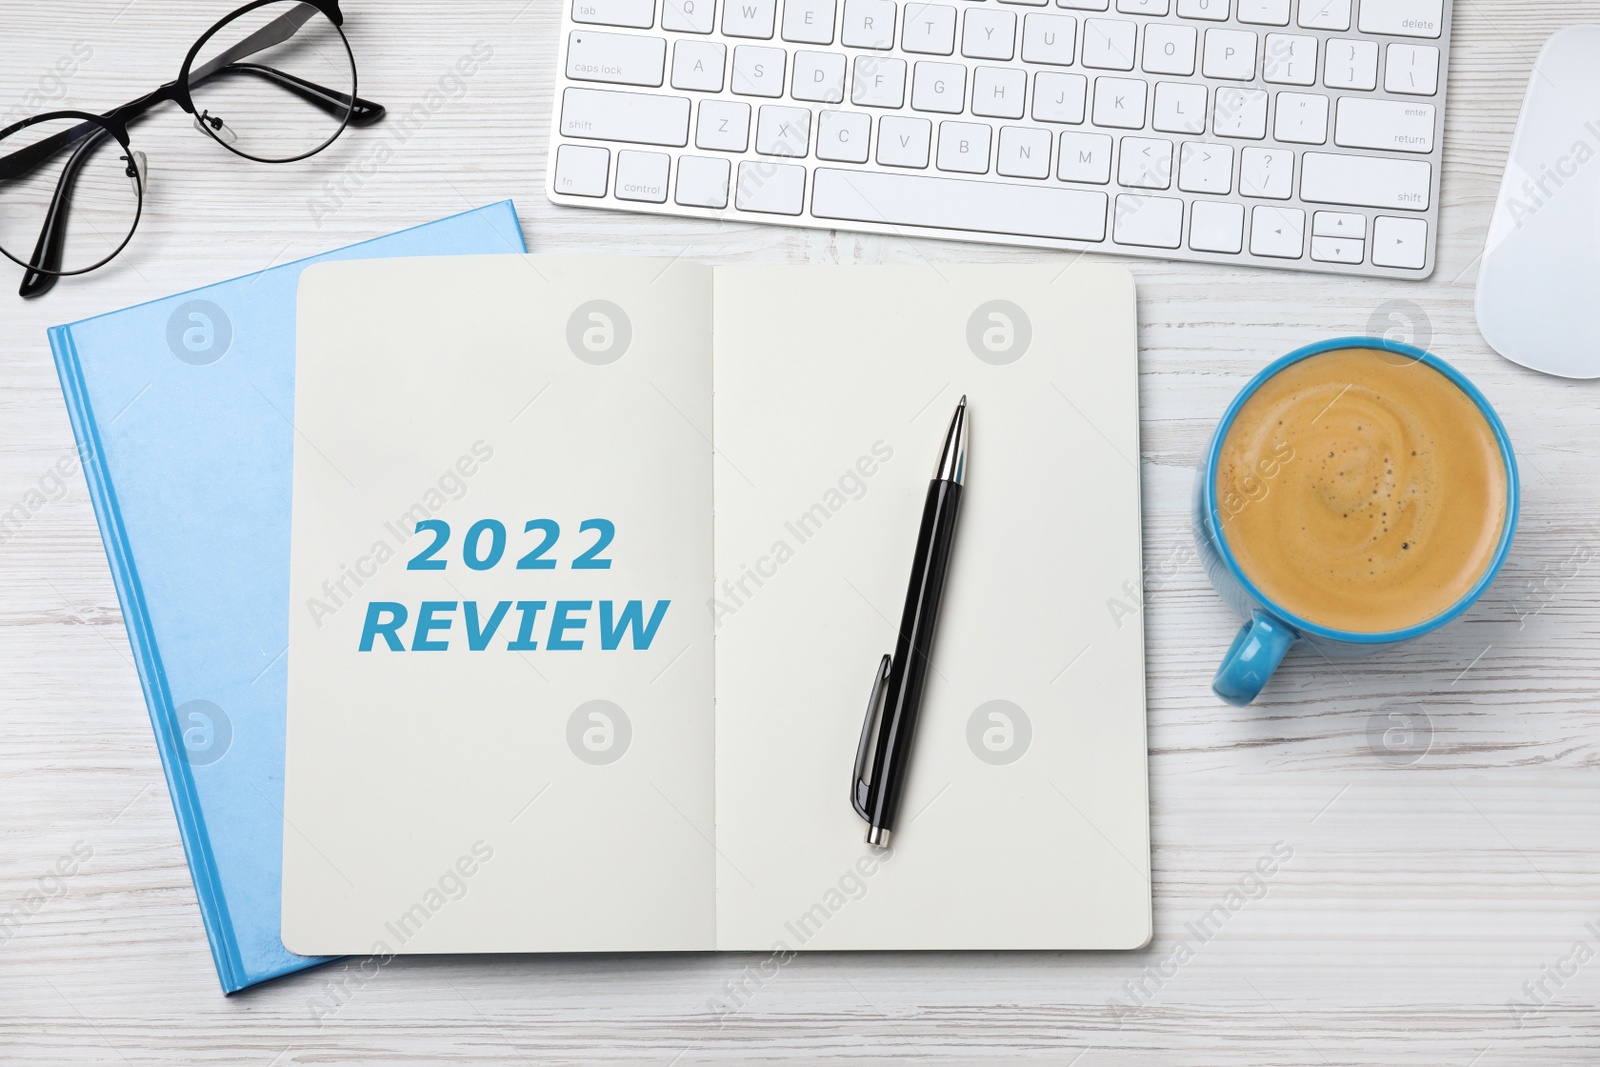 Image of Text 2022 Review written in notebook, keyboard, cup of coffee, glasses, pen on white wooden table, flat lay